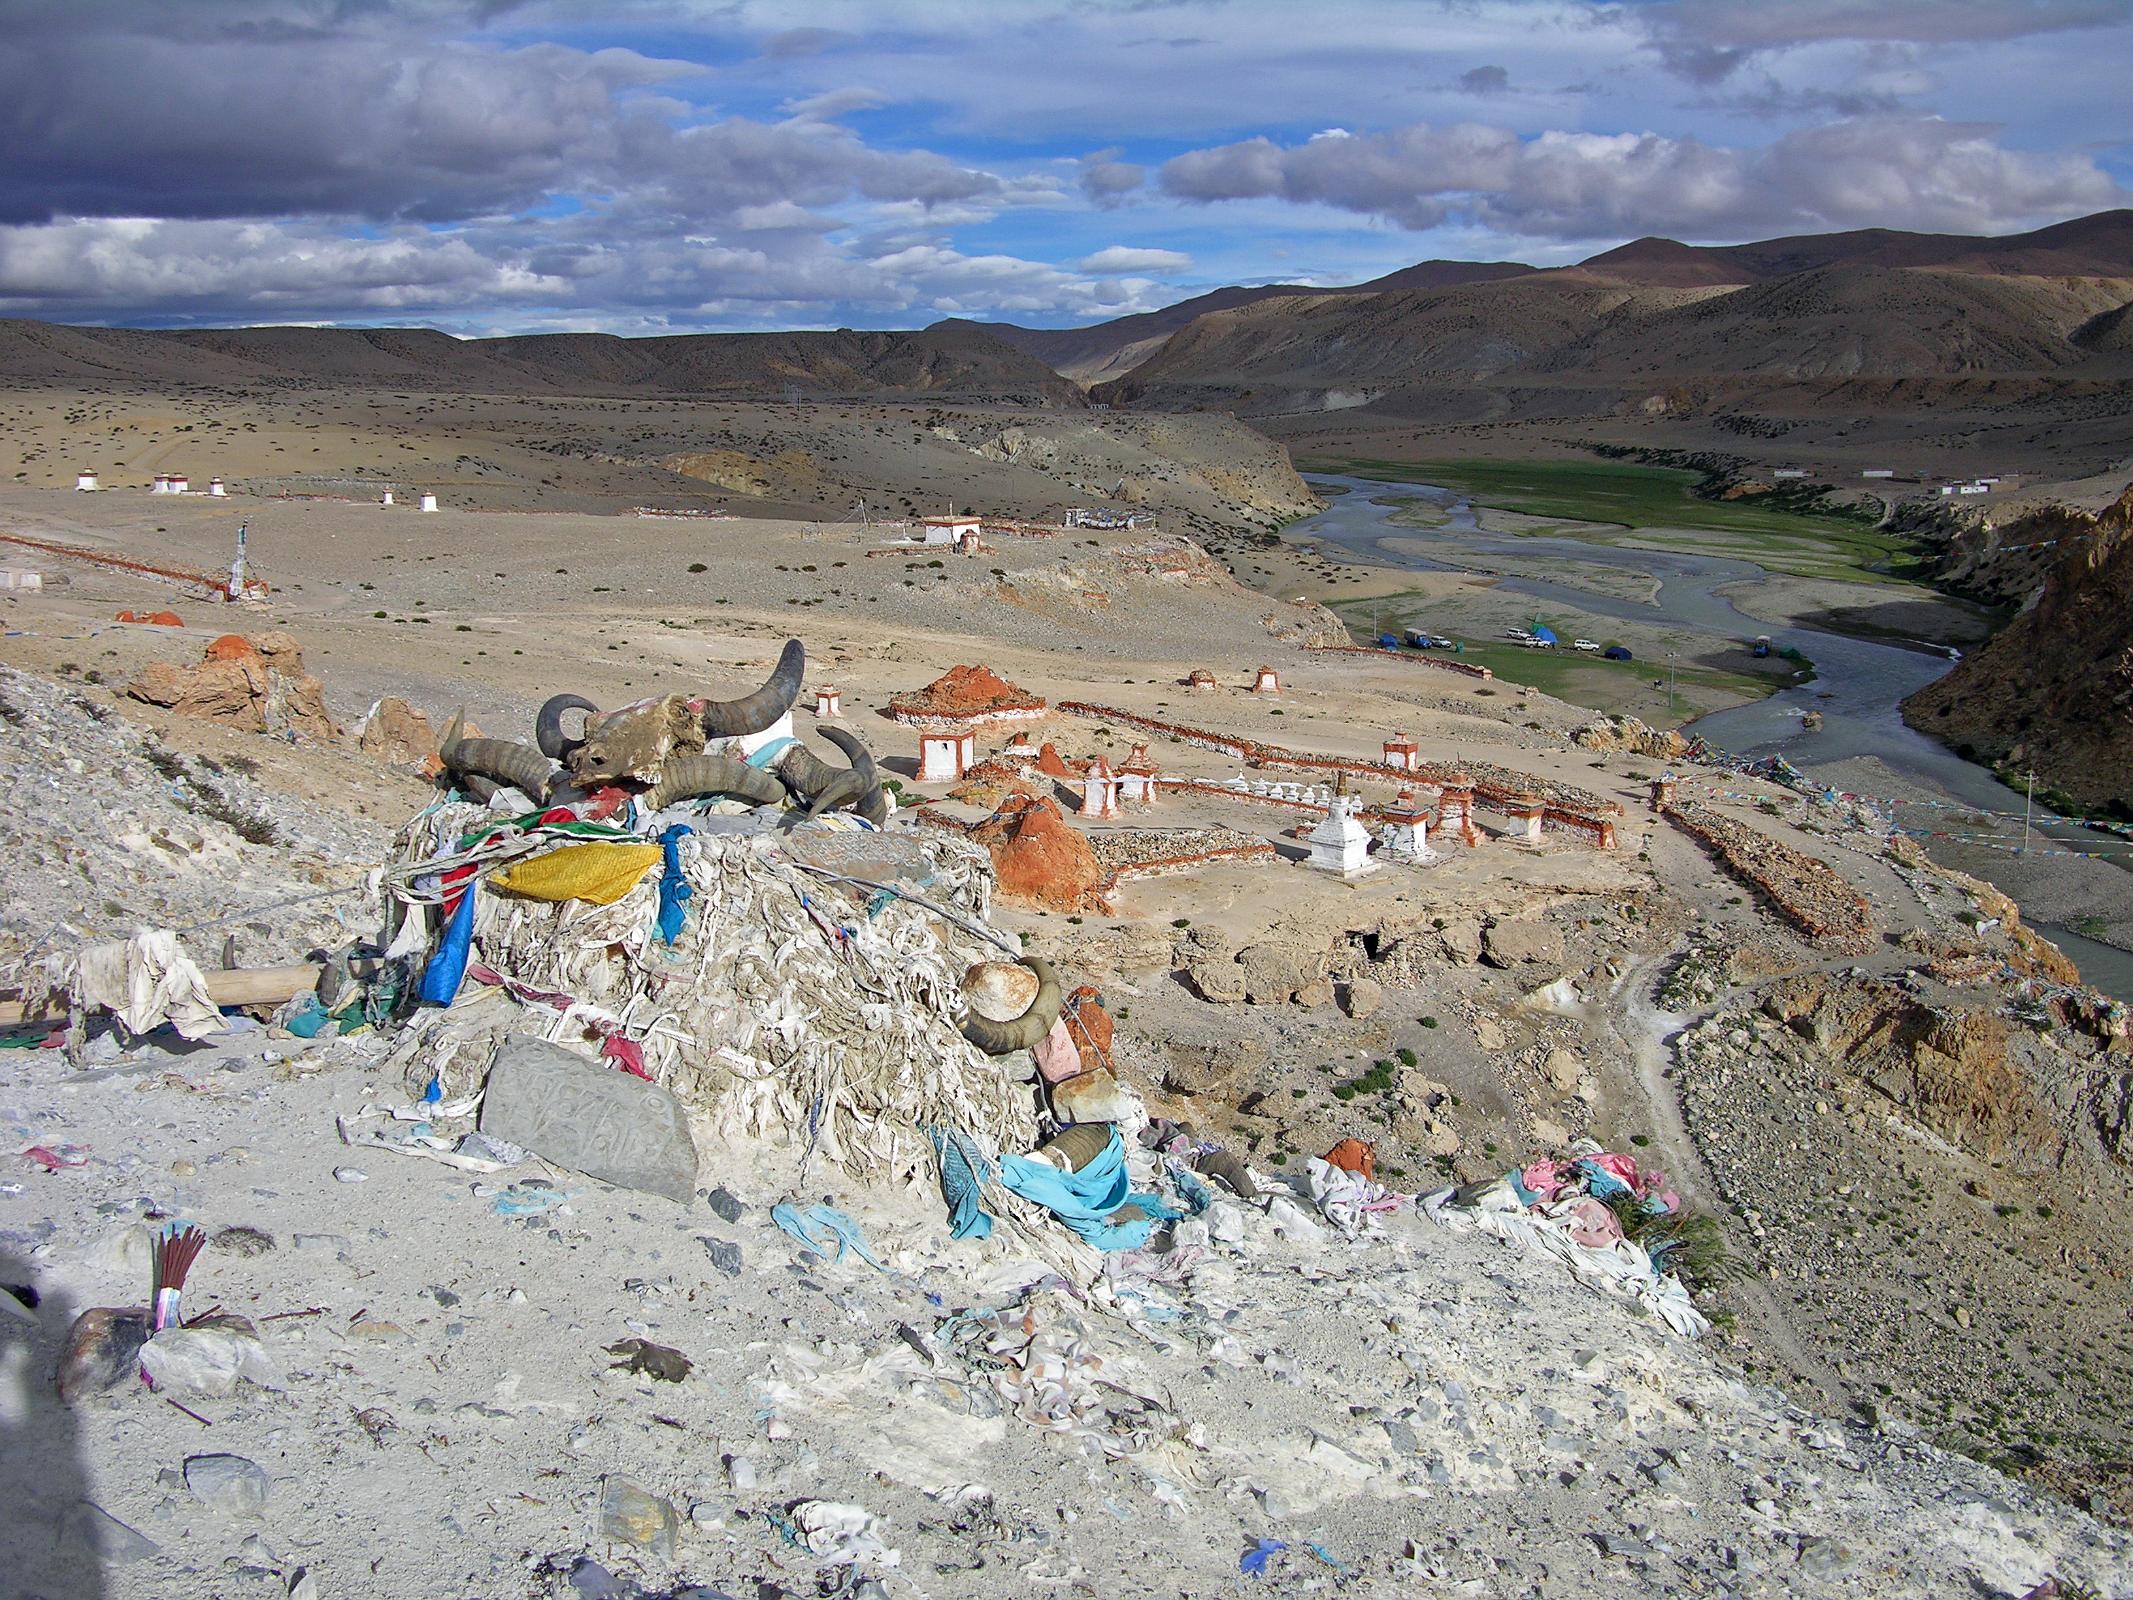 Tibet Kailash 06 Tirthapuri 11 View From Pass On Kora After the hot springs the trail climbs past a cremation area consecrated to Yeshe Tsogyal, and then reaches a miniature version of Kailash's Dlma La, marked with mani stones, prayer flags and a large collection of yak horns and skulls. To the left is the end of a recently constructed over 200m long mani wall, which points to the northeast directly towards Mount Kailas. The wall was the end result of a demon firing an arrow at the guru. He stopped the arrow's flight and transformed it into this wall.